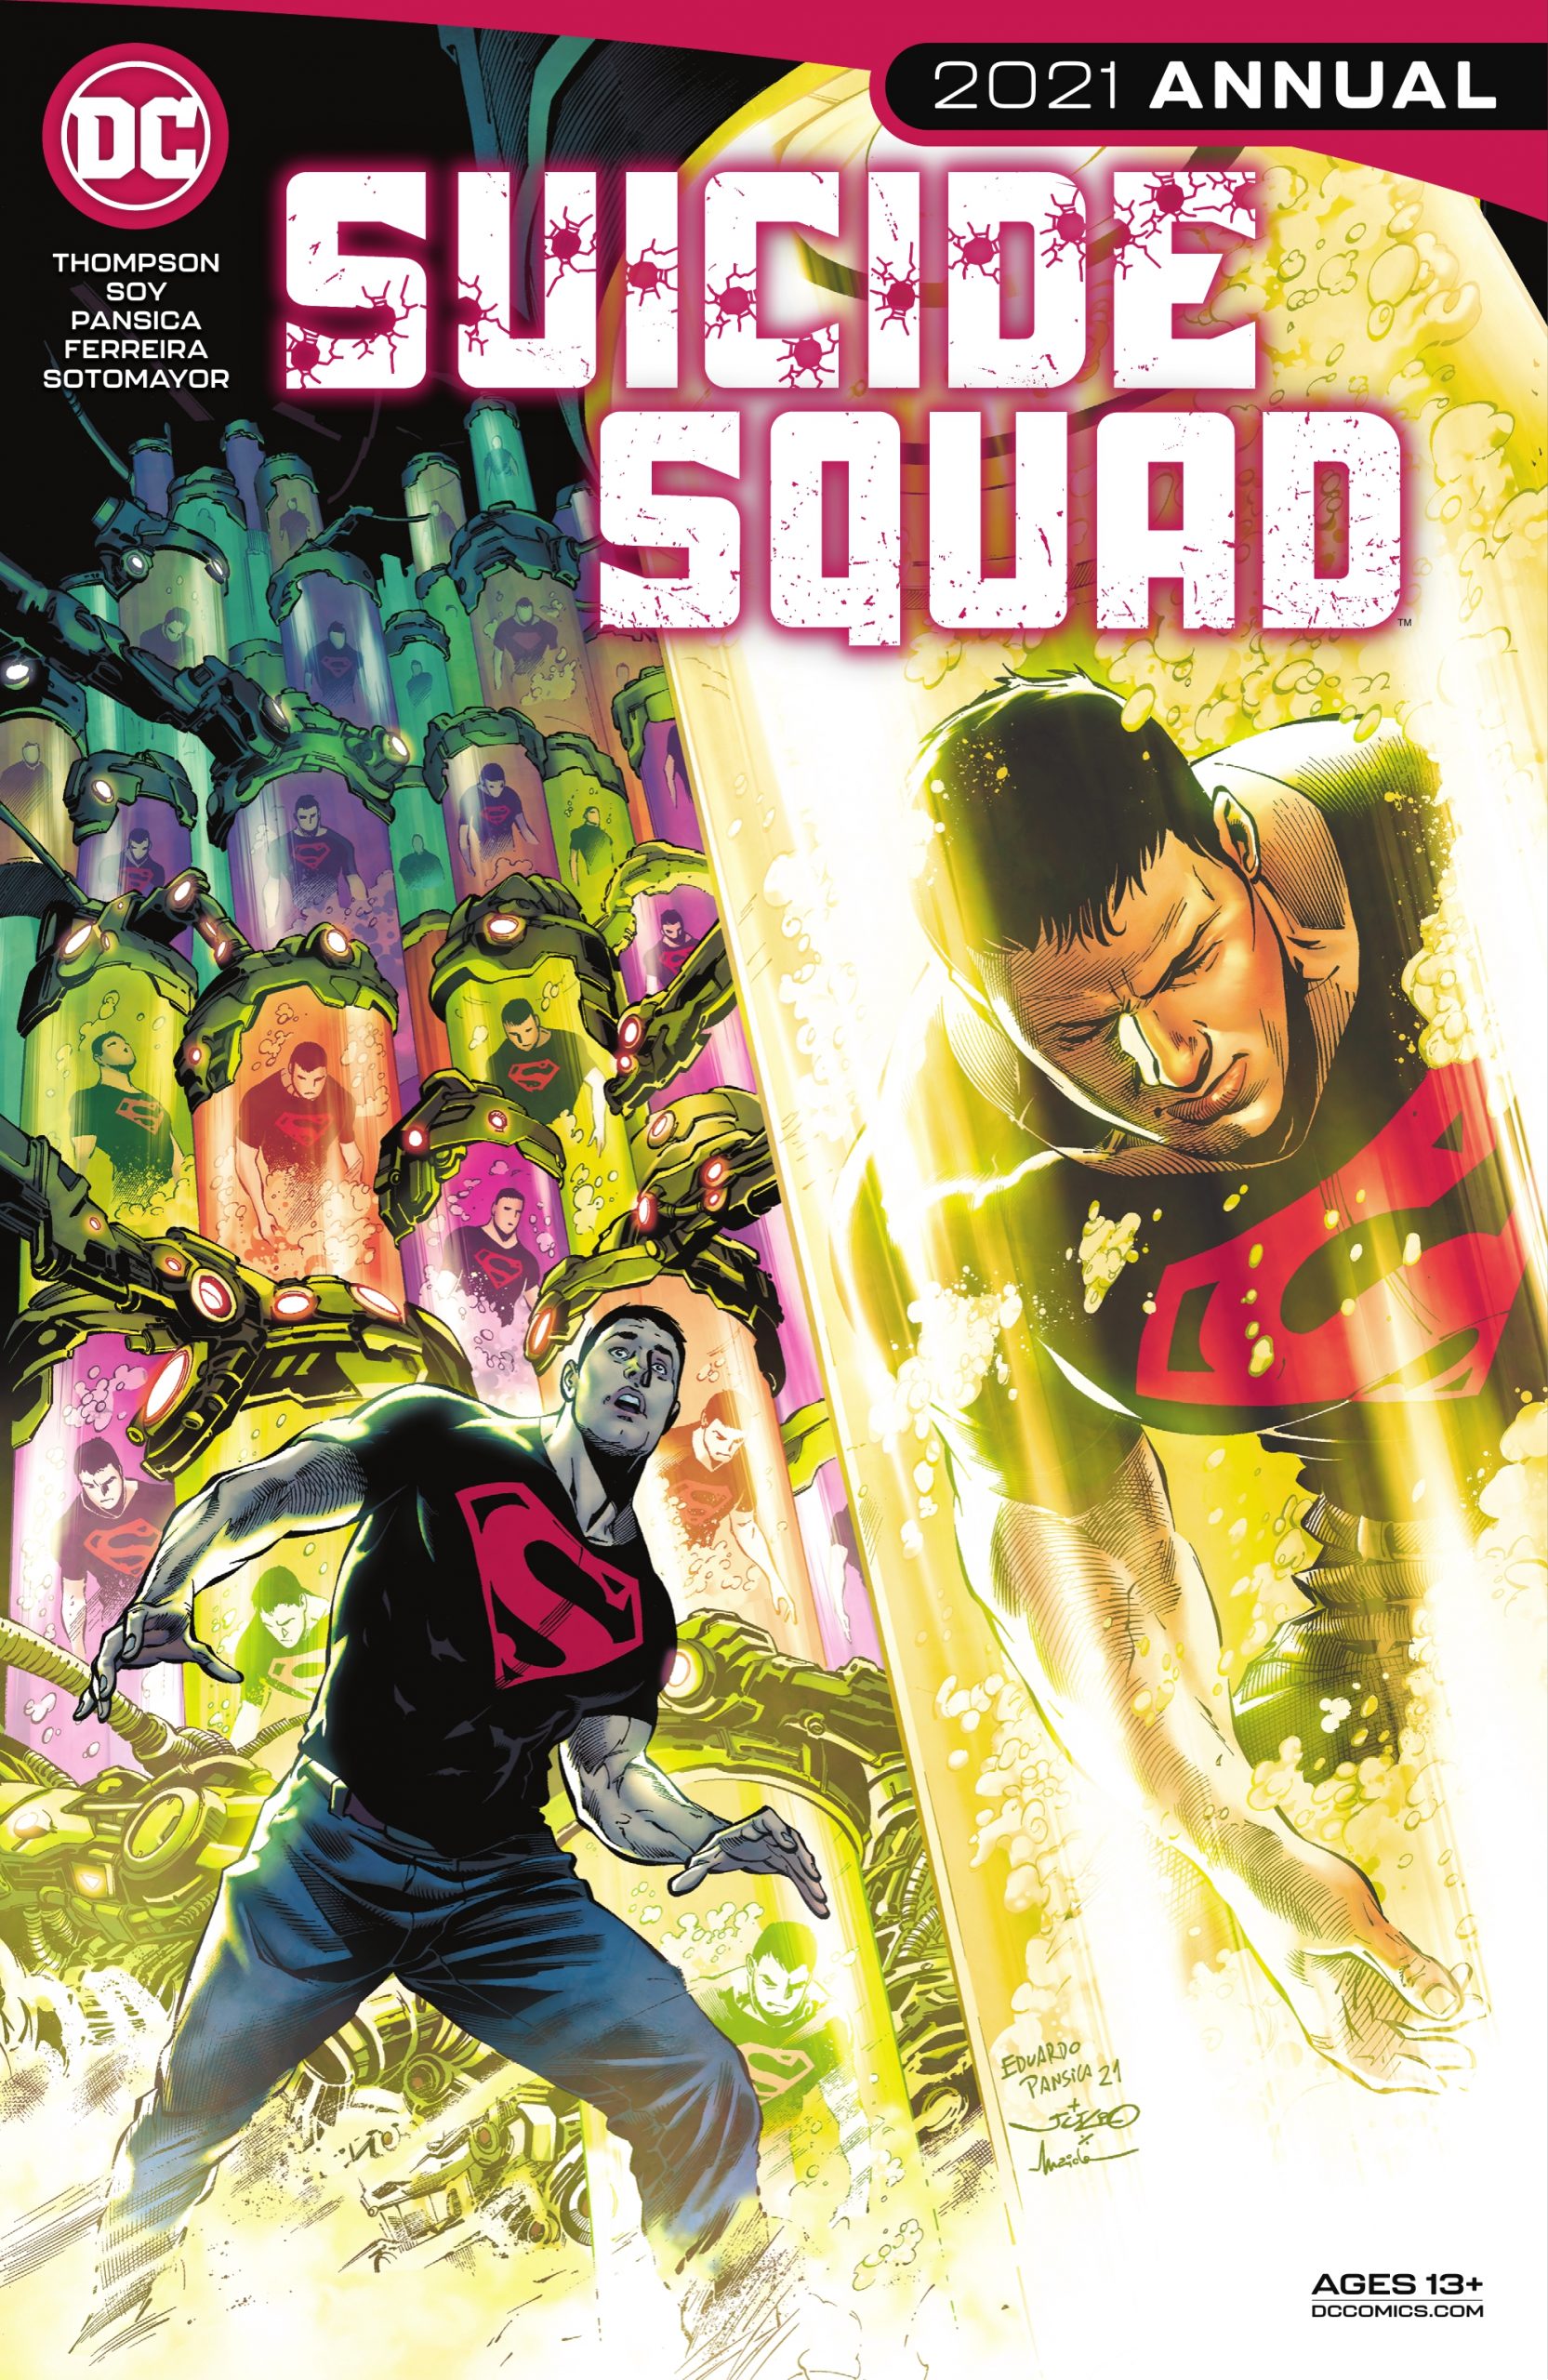 https://langgeek.net/wp-content/uploads/2021/11/Suicide-Squad-2021-Annual-2021-001-000-scaled.jpg